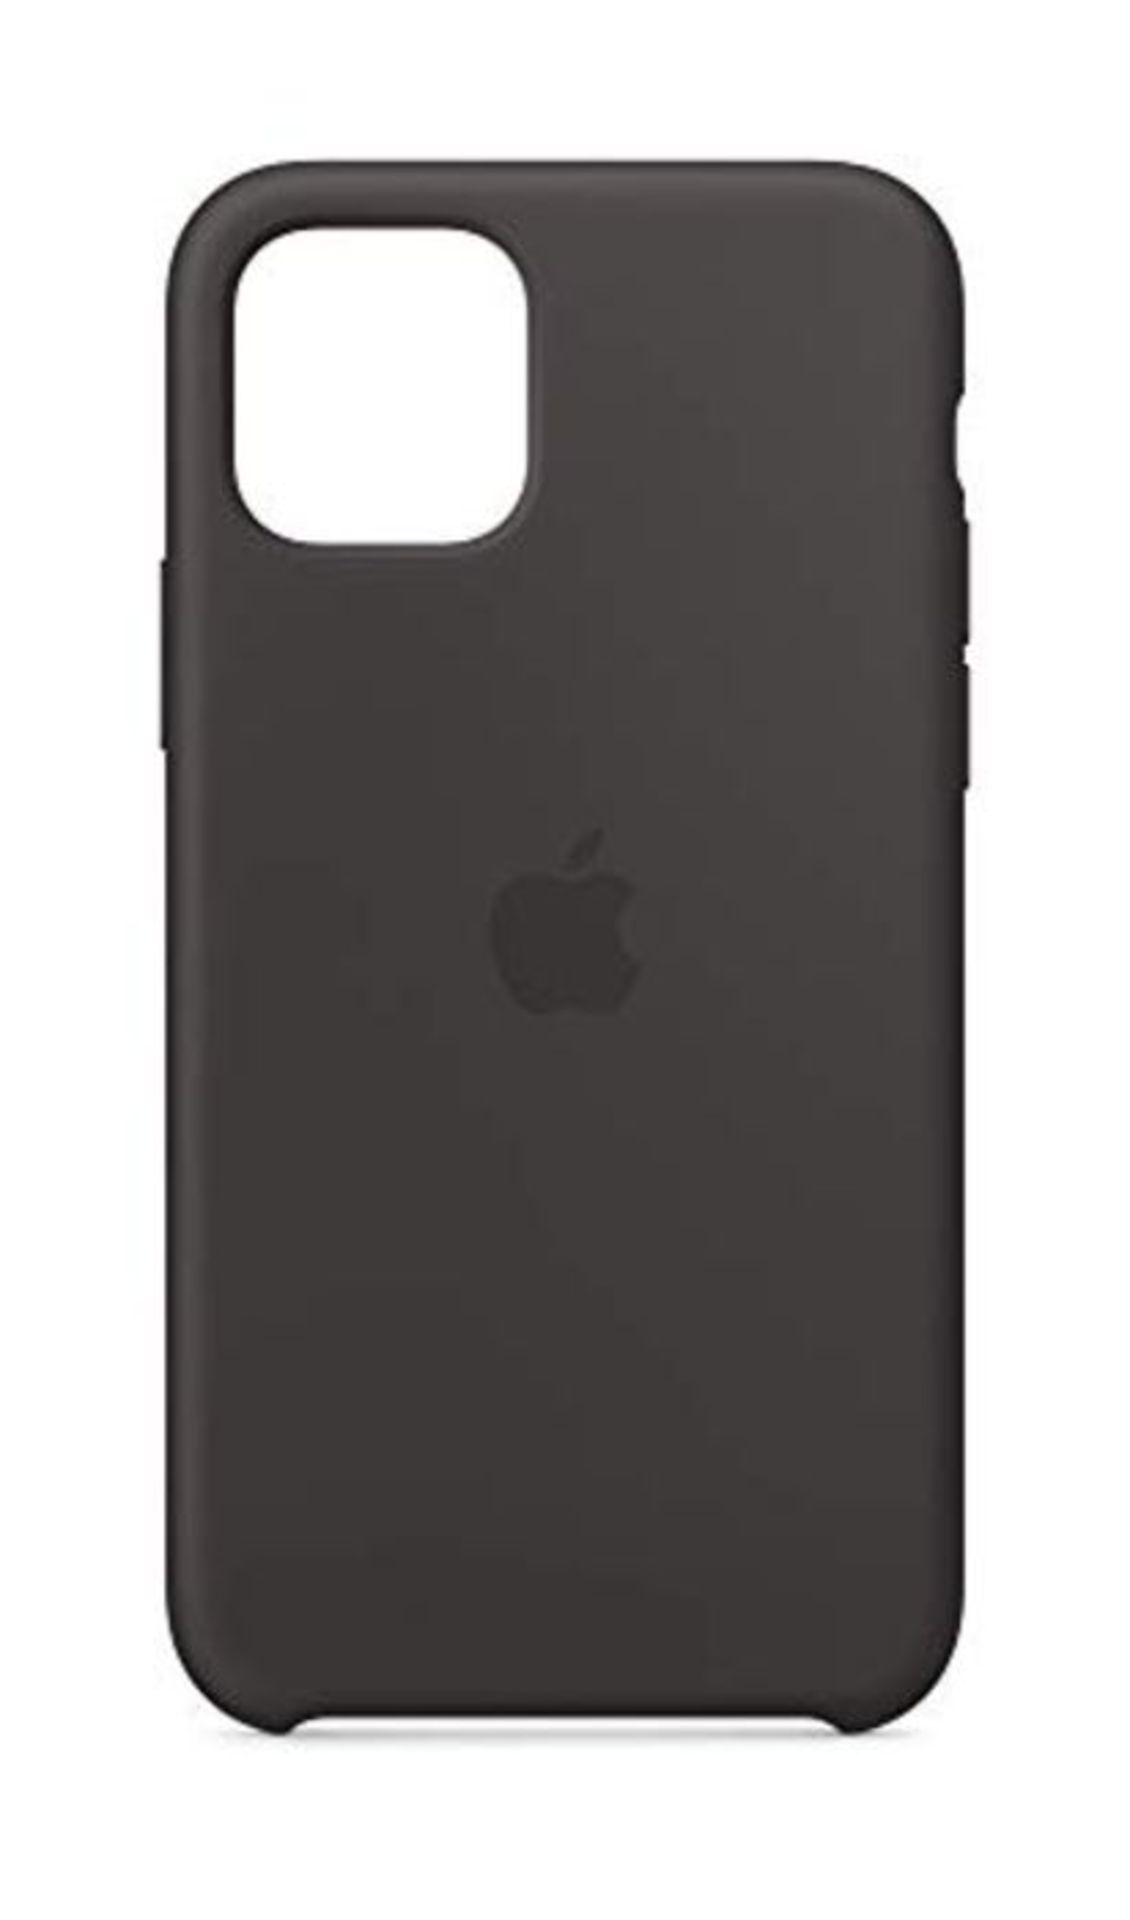 Apple Silicone Case (for iPhone 11 Pro) - Mint